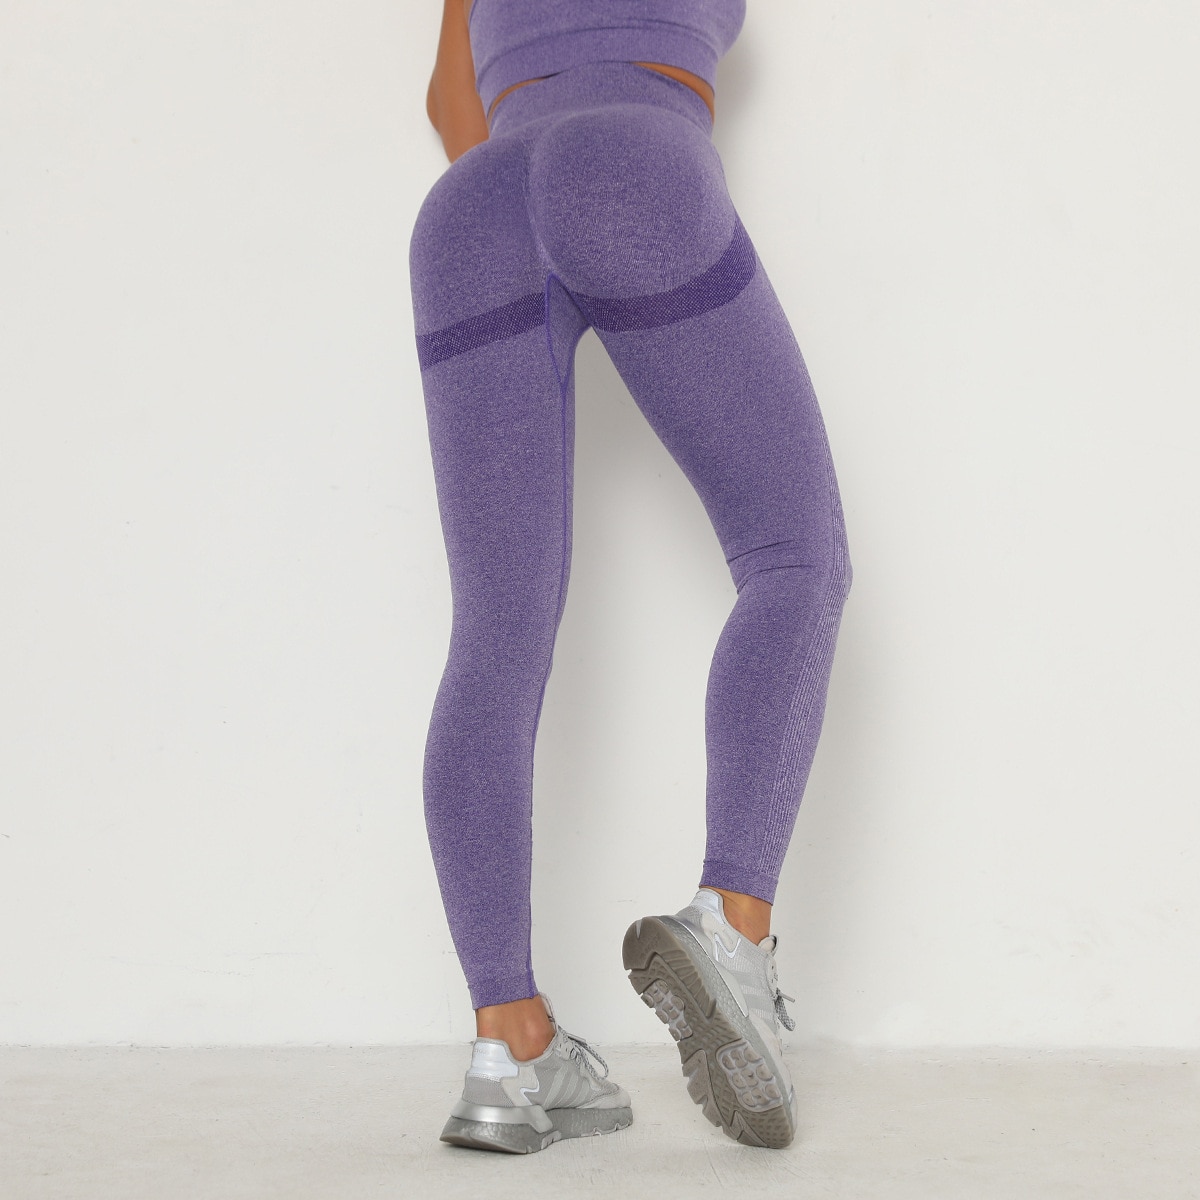 High Waist Seamless Leggings with Push Up Effect